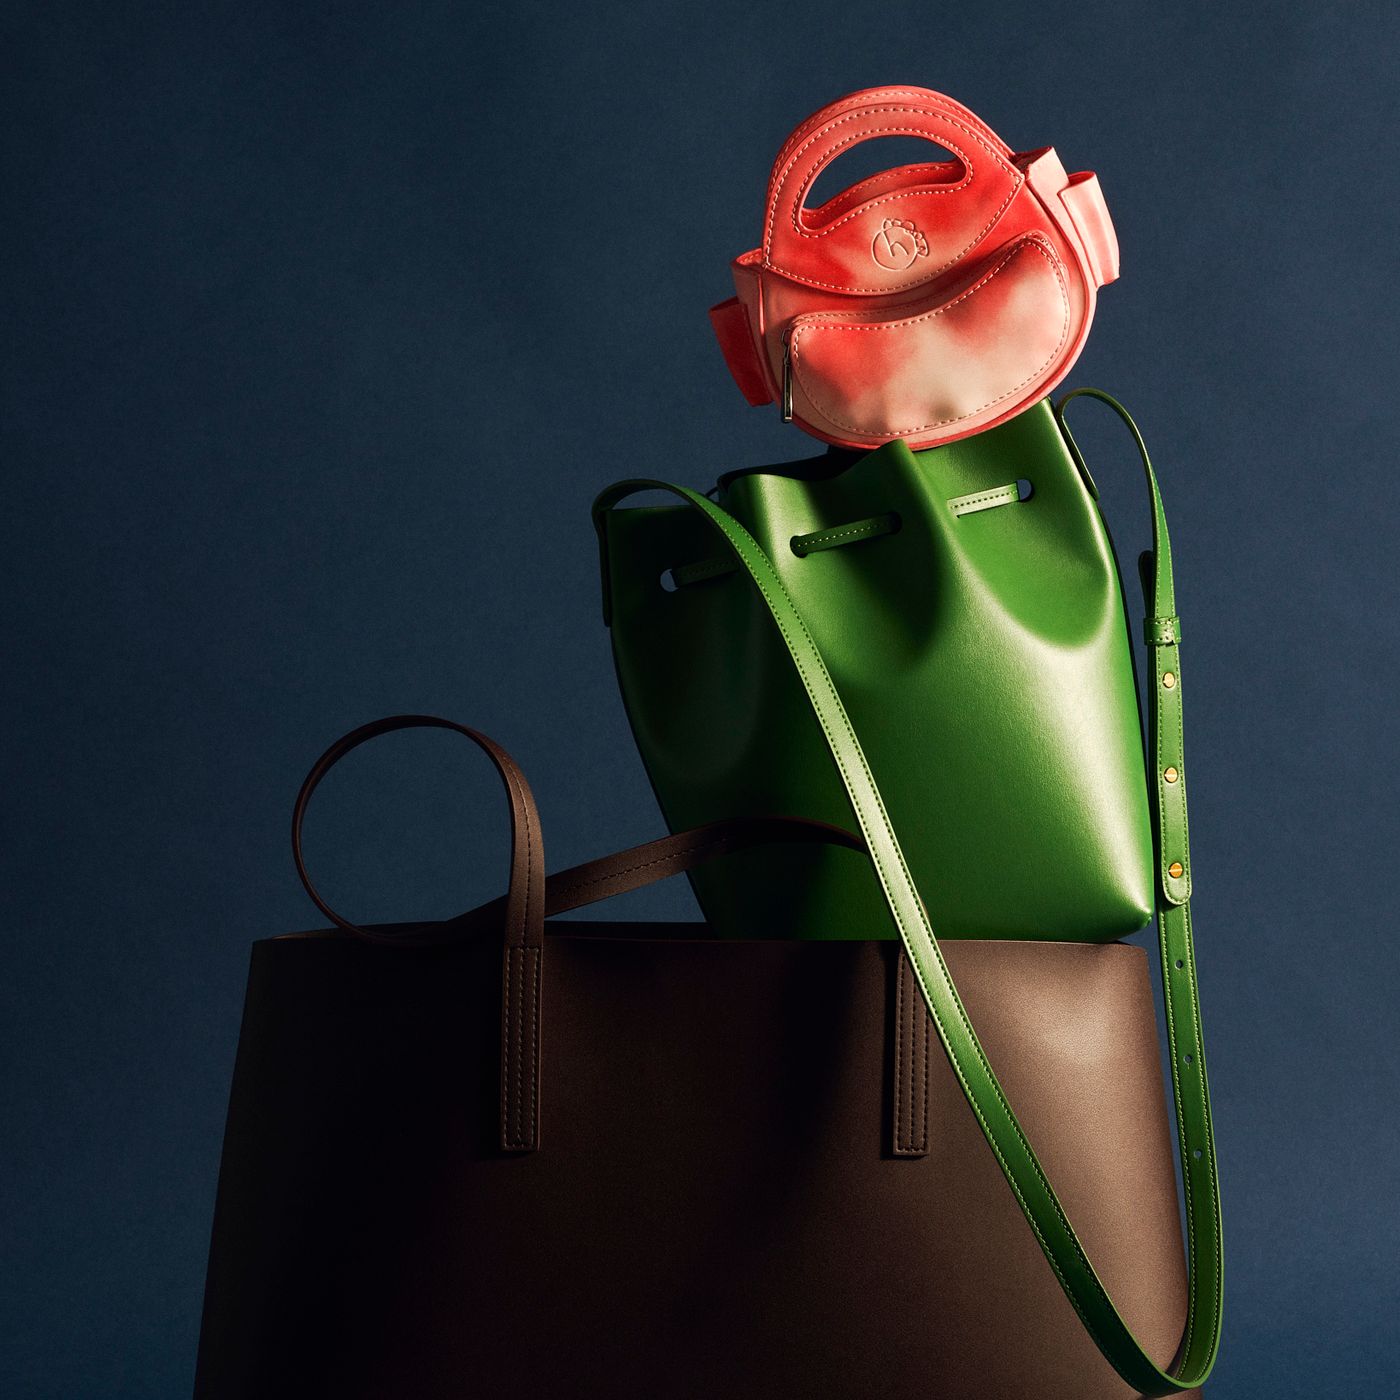 Agave Triangular Tote in Green, Cactus Leather Handbag